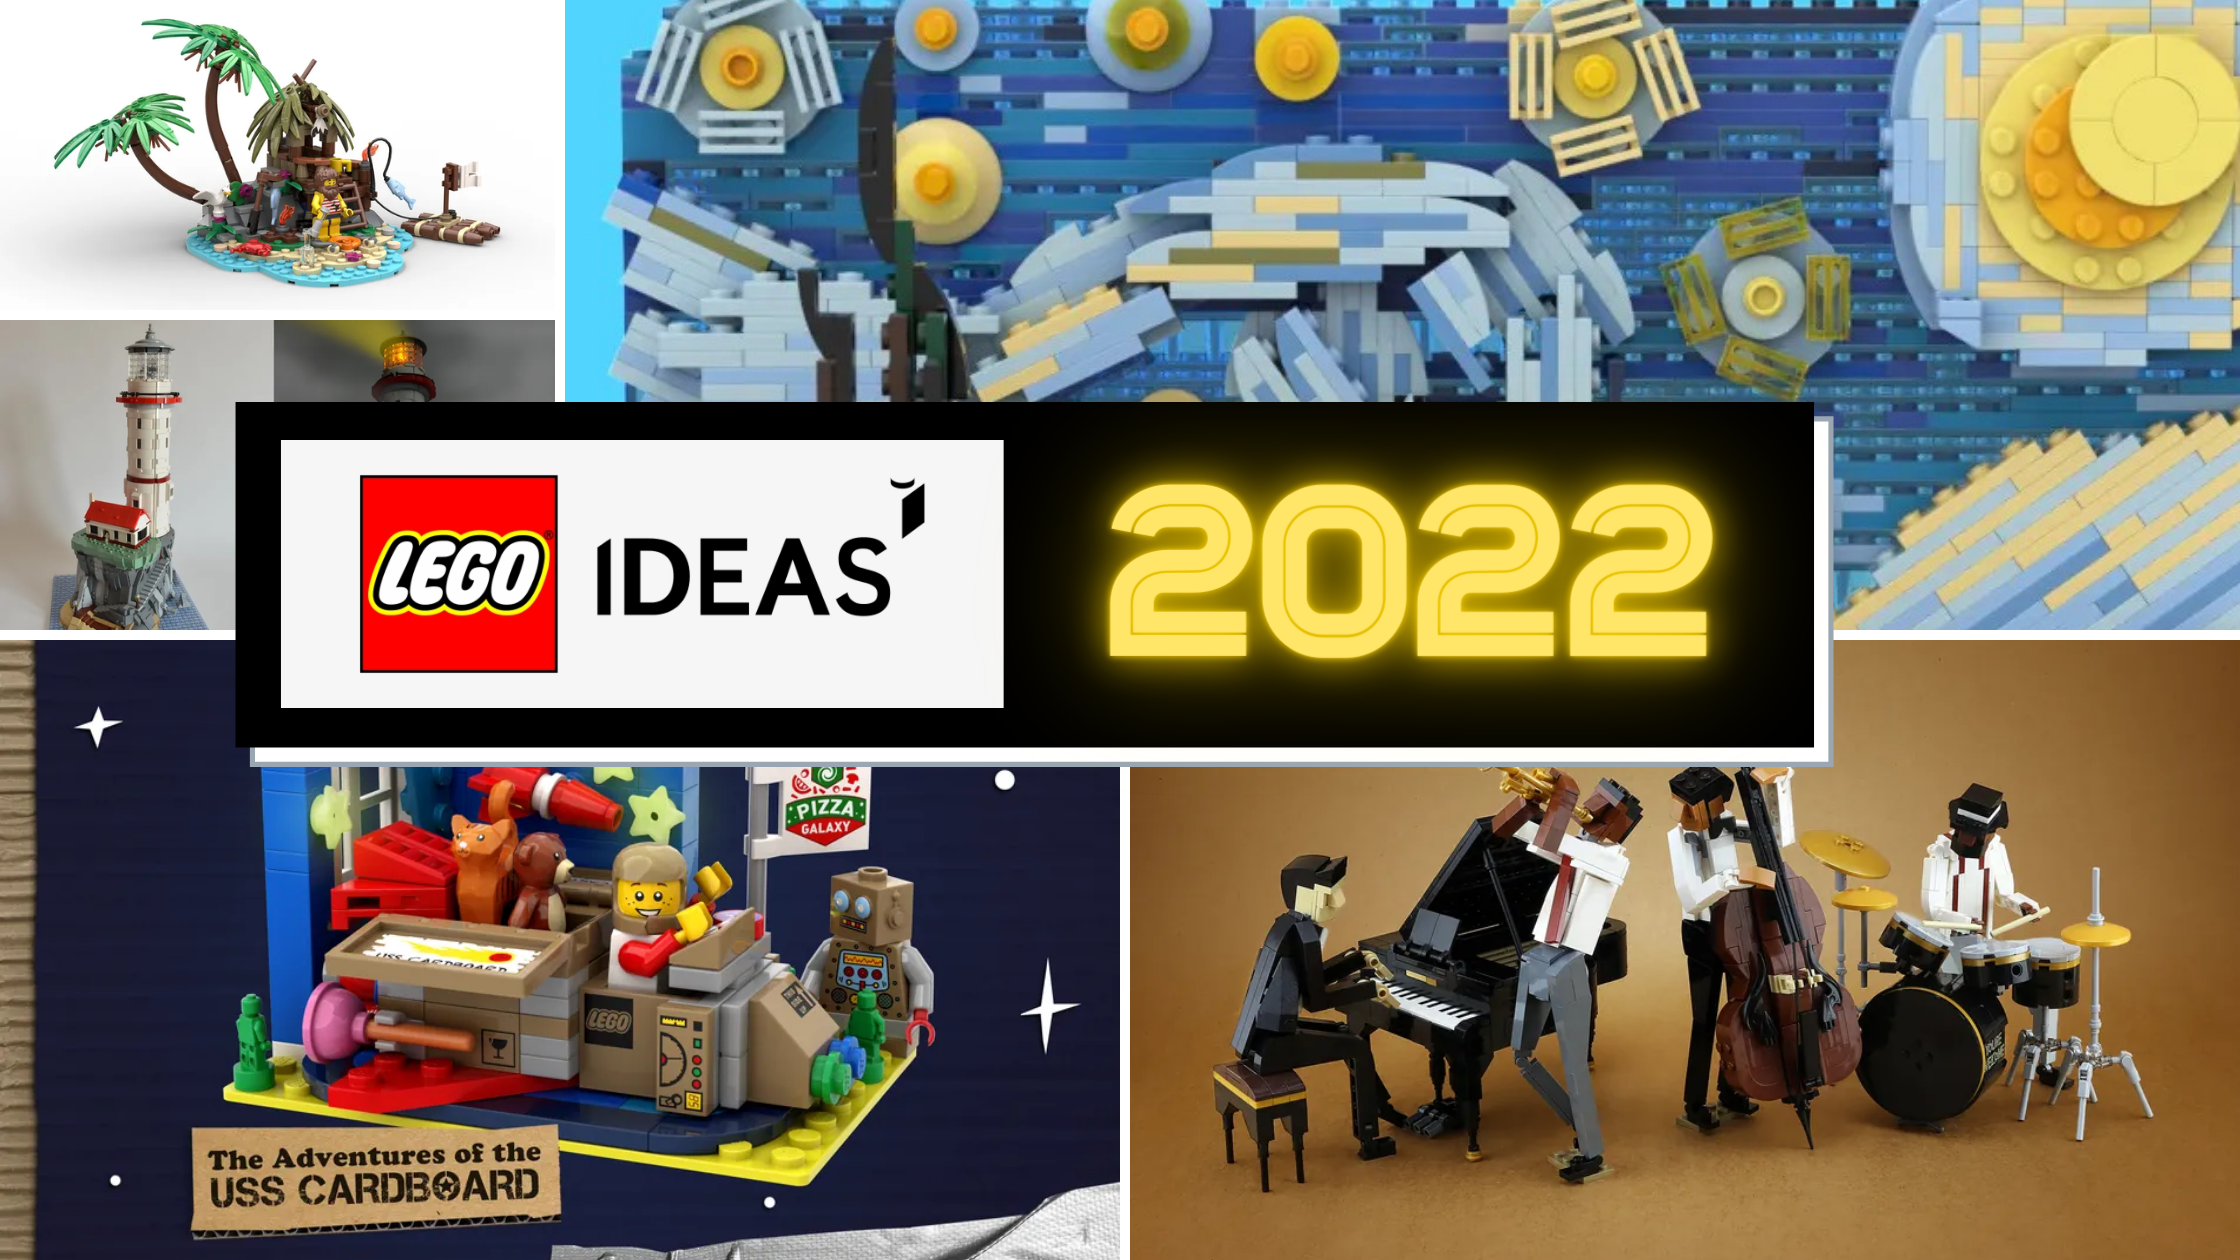 Lego July 2022 Calendar List Of Lego Ideas Sets Coming In 2022... And Beyond! [Updated February] -  Jay's Brick Blog